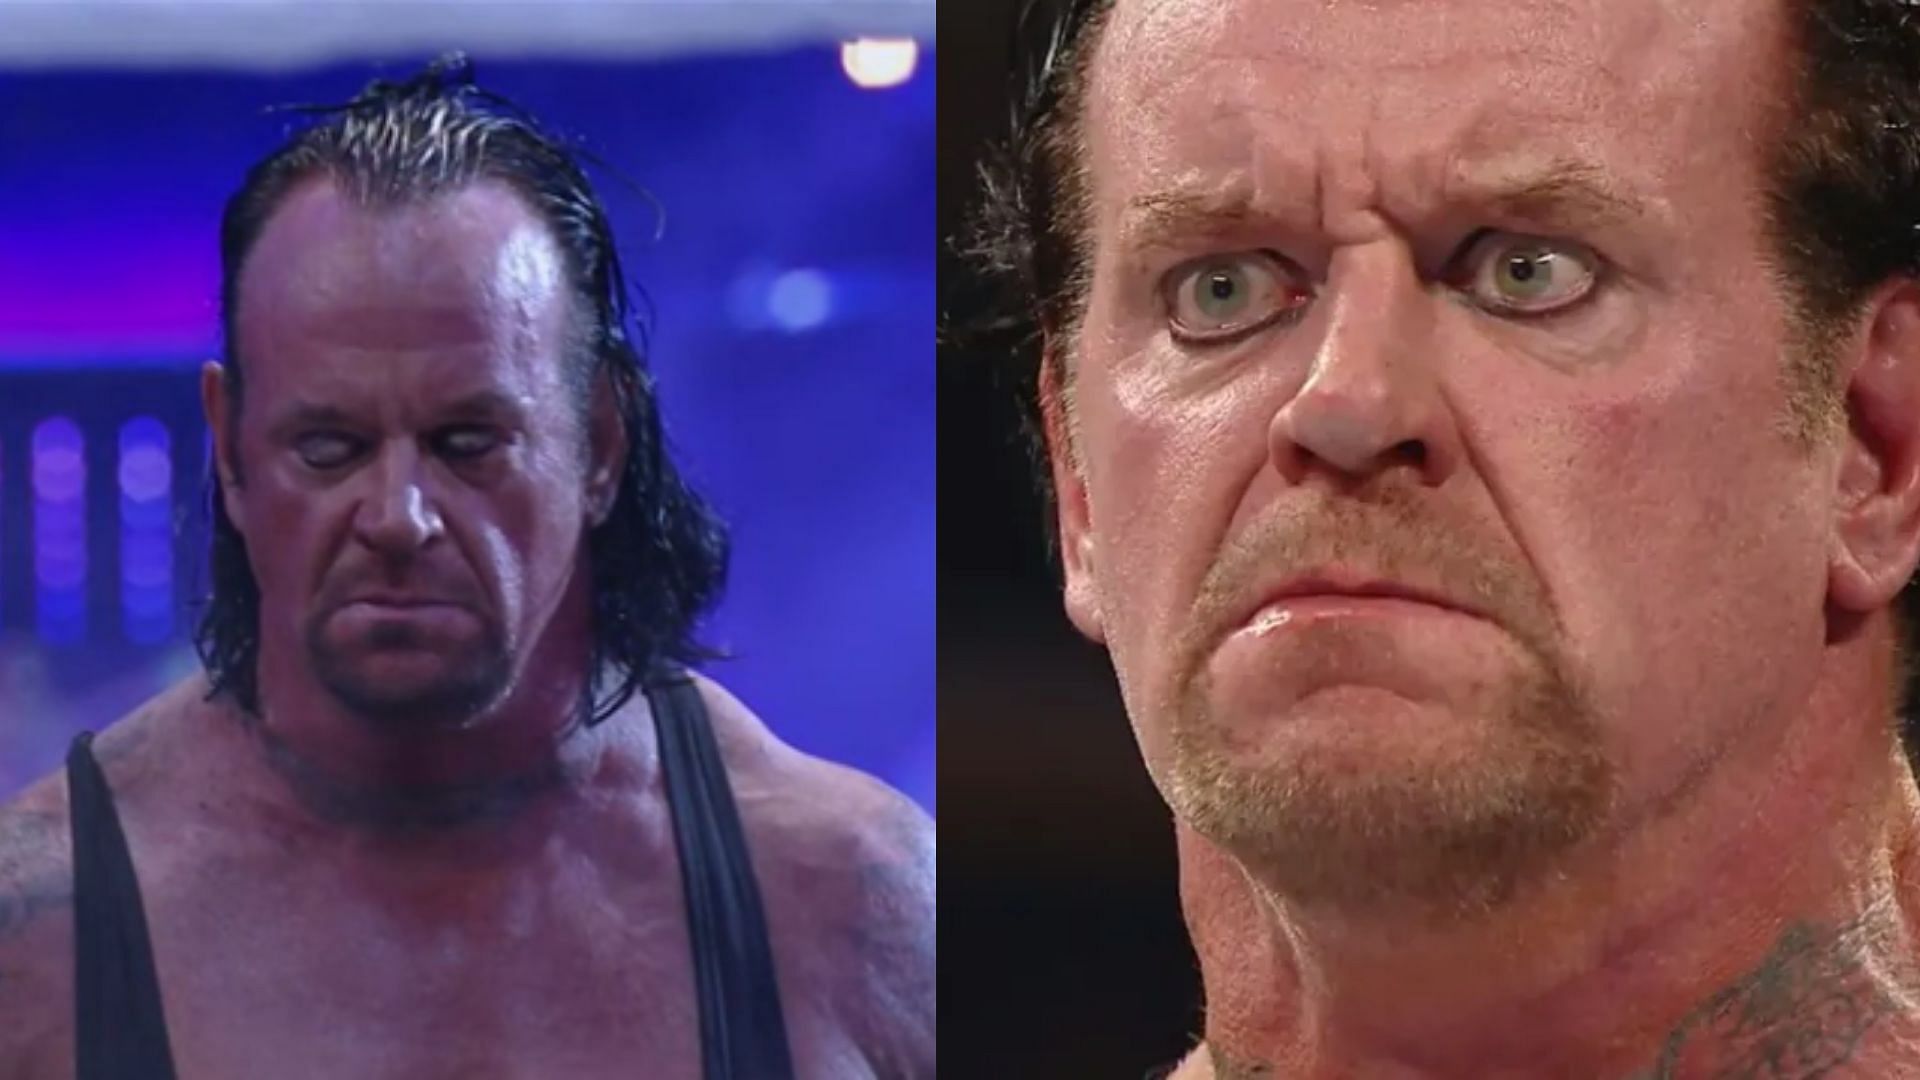 The Undertaker has been iconic in WWE